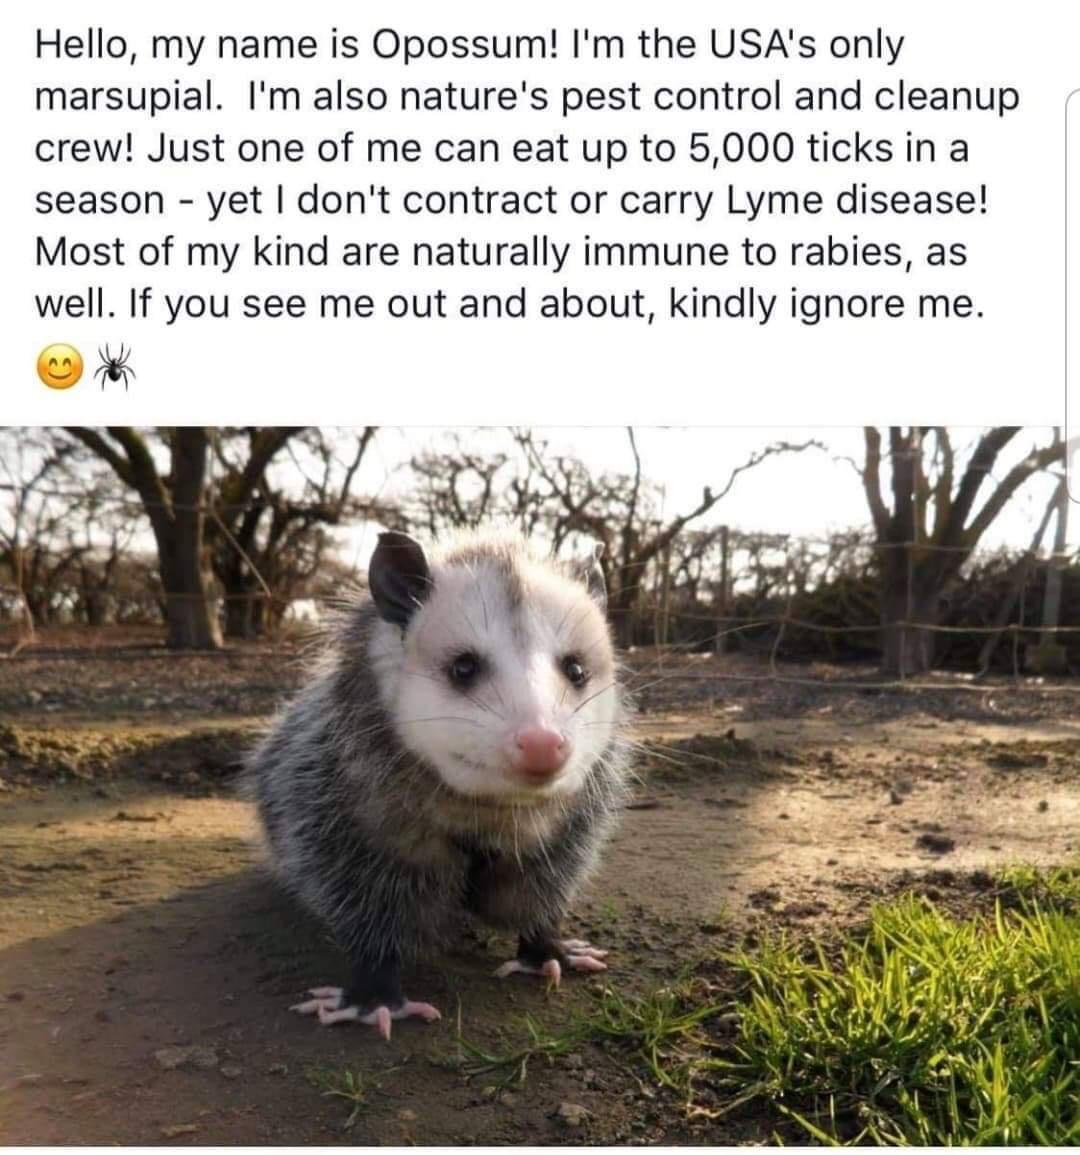 opossum meme - Hello, my name is Opossum! I'm the Usa's only marsupial. I'm also nature's pest control and cleanup crew! Just one of me can eat up to 5,000 ticks in a season yet I don't contract or carry Lyme disease! Most of my kind are naturally immune 